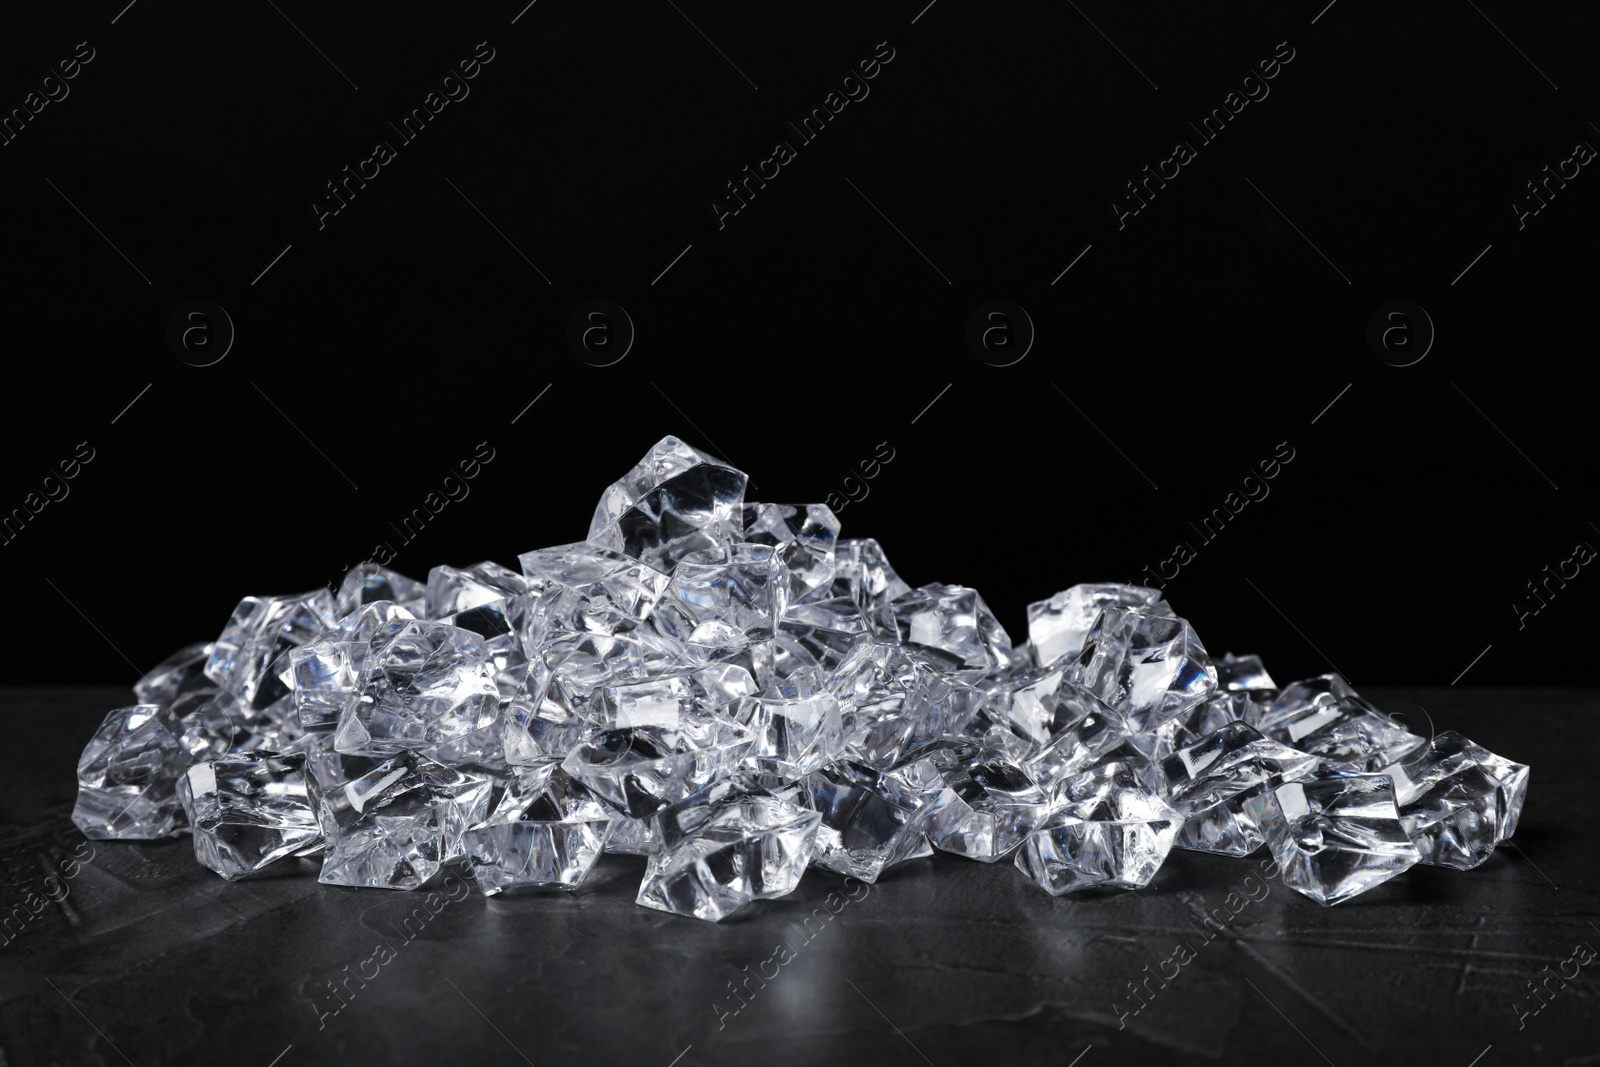 Photo of Pile of crushed ice on grey table against black background